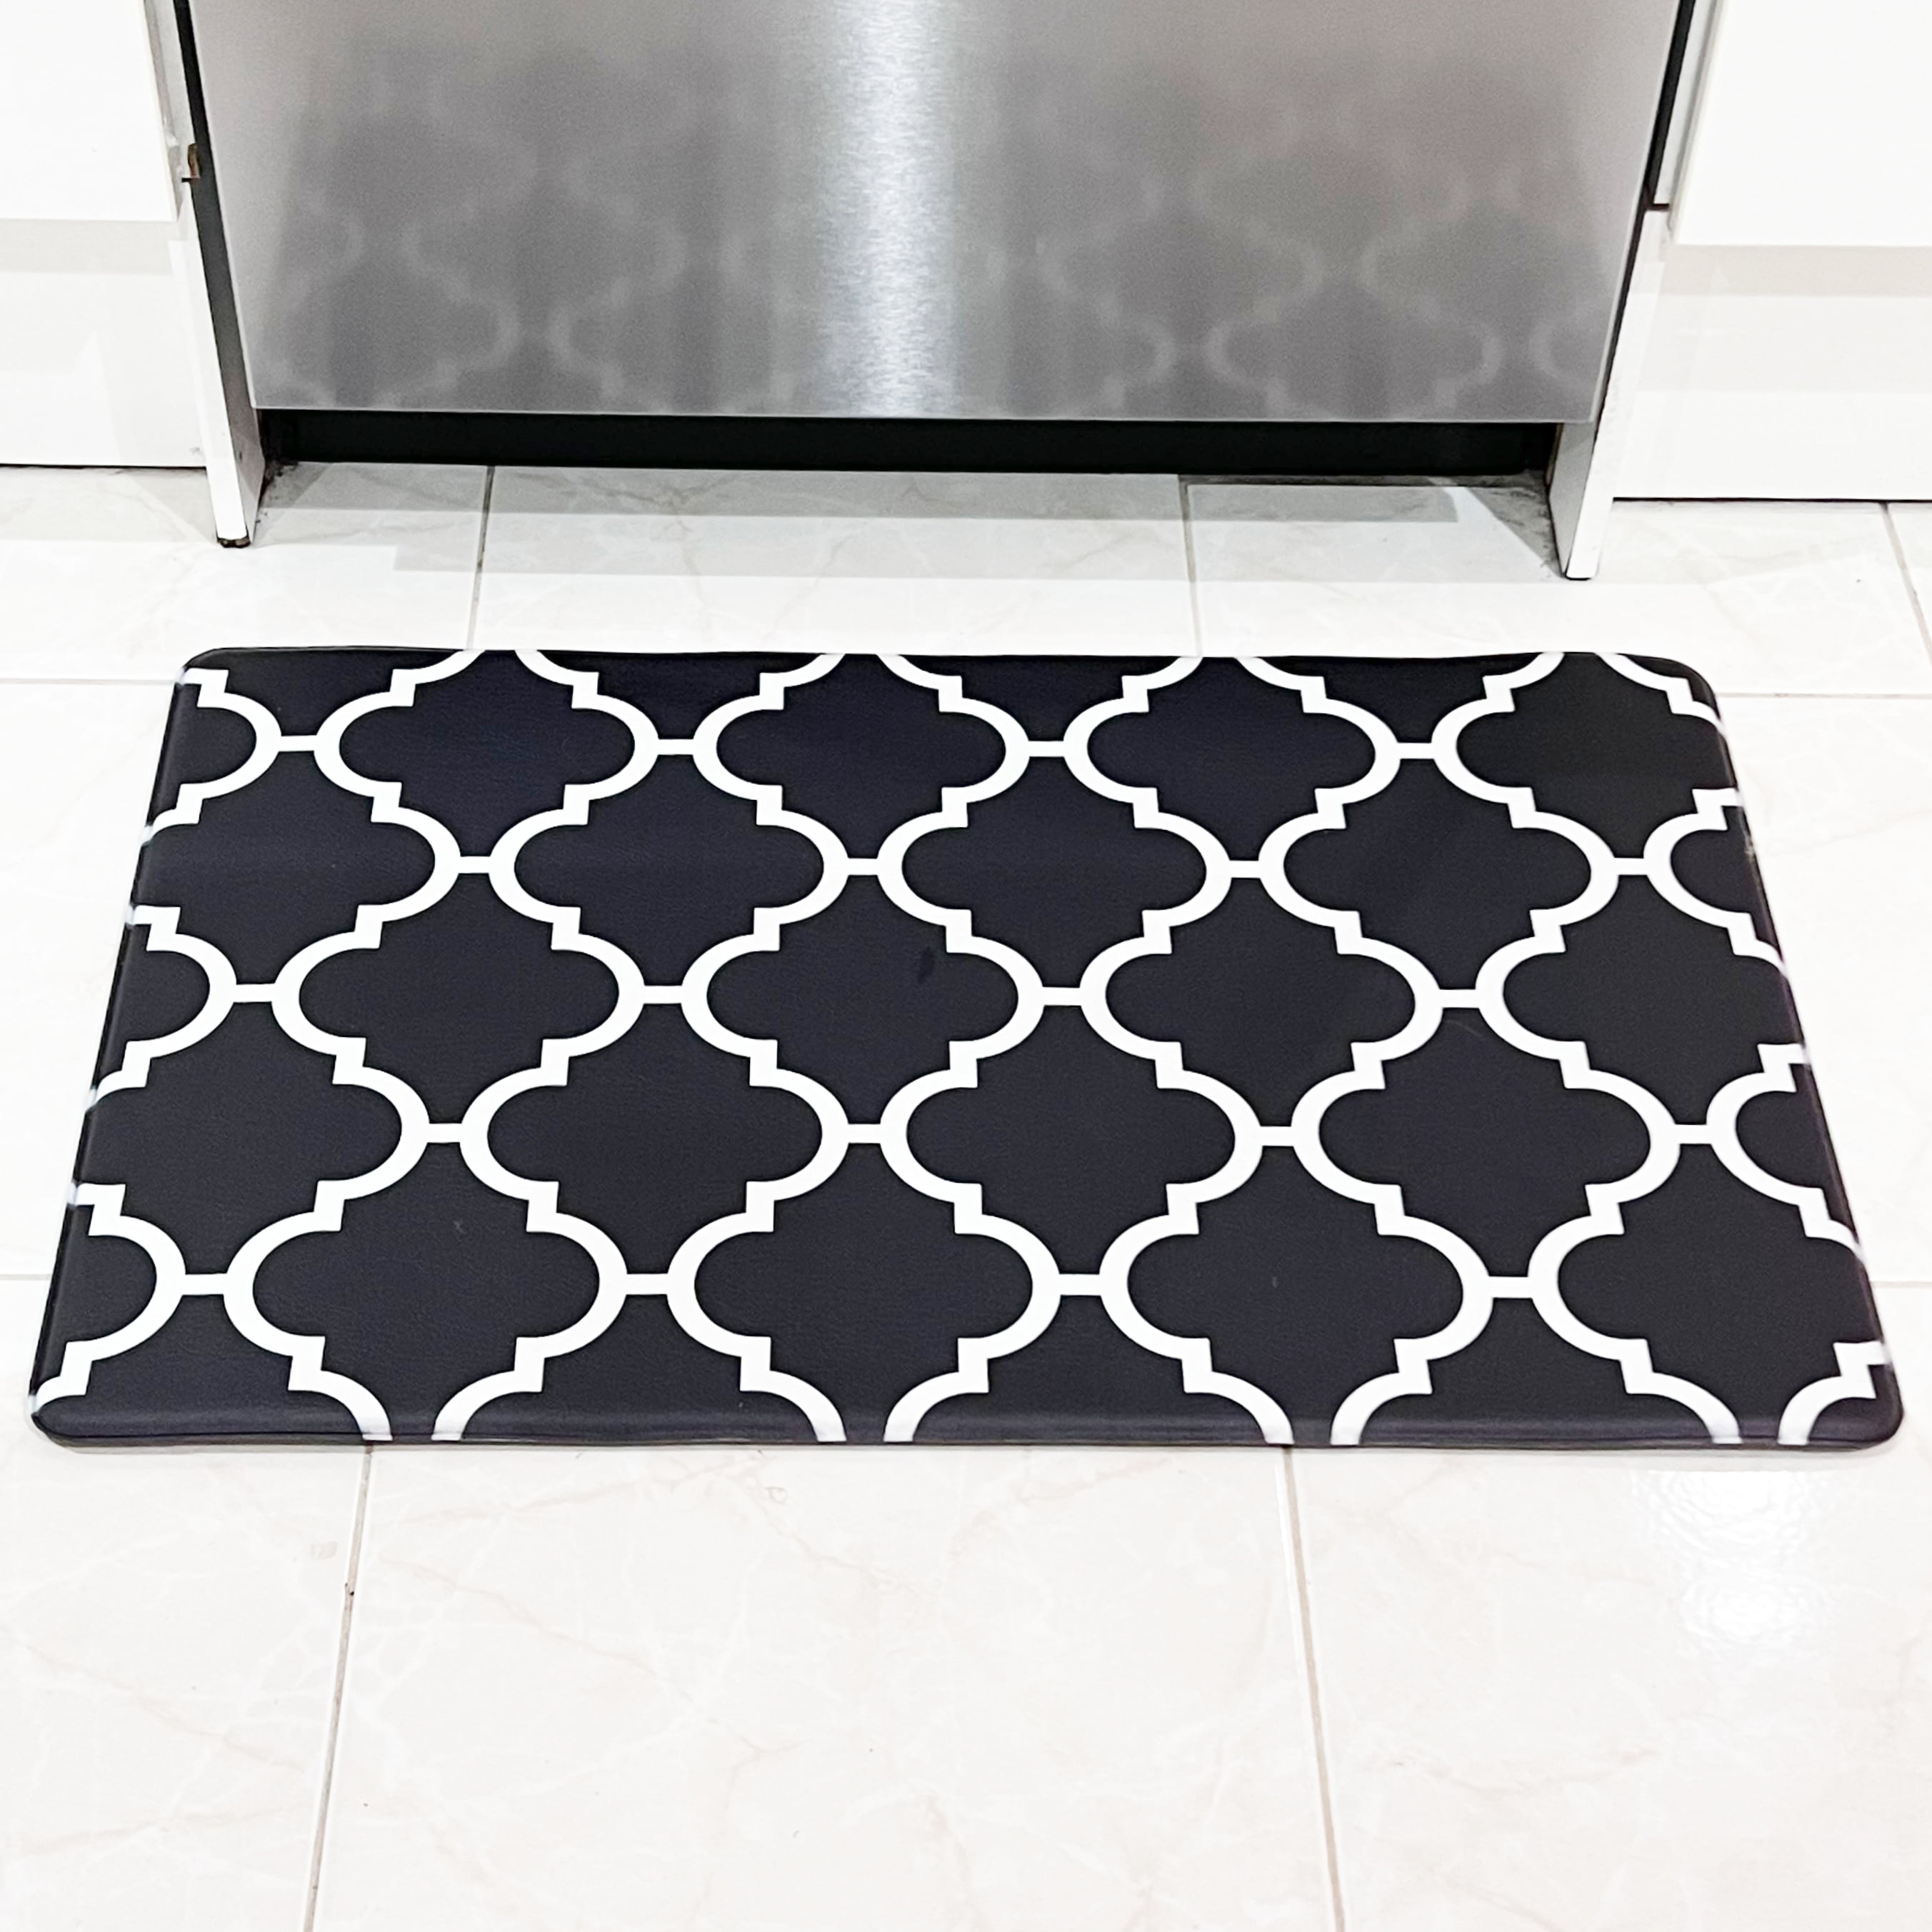 WISELIFE Anti-Fatigue Cushioned Kitchen Mat / Rug ,17.3x 28,Non Slip  Heavy Duty PVC Ergonomic Waterproof Comfort Rugs for Floor Home, Office,  Sink